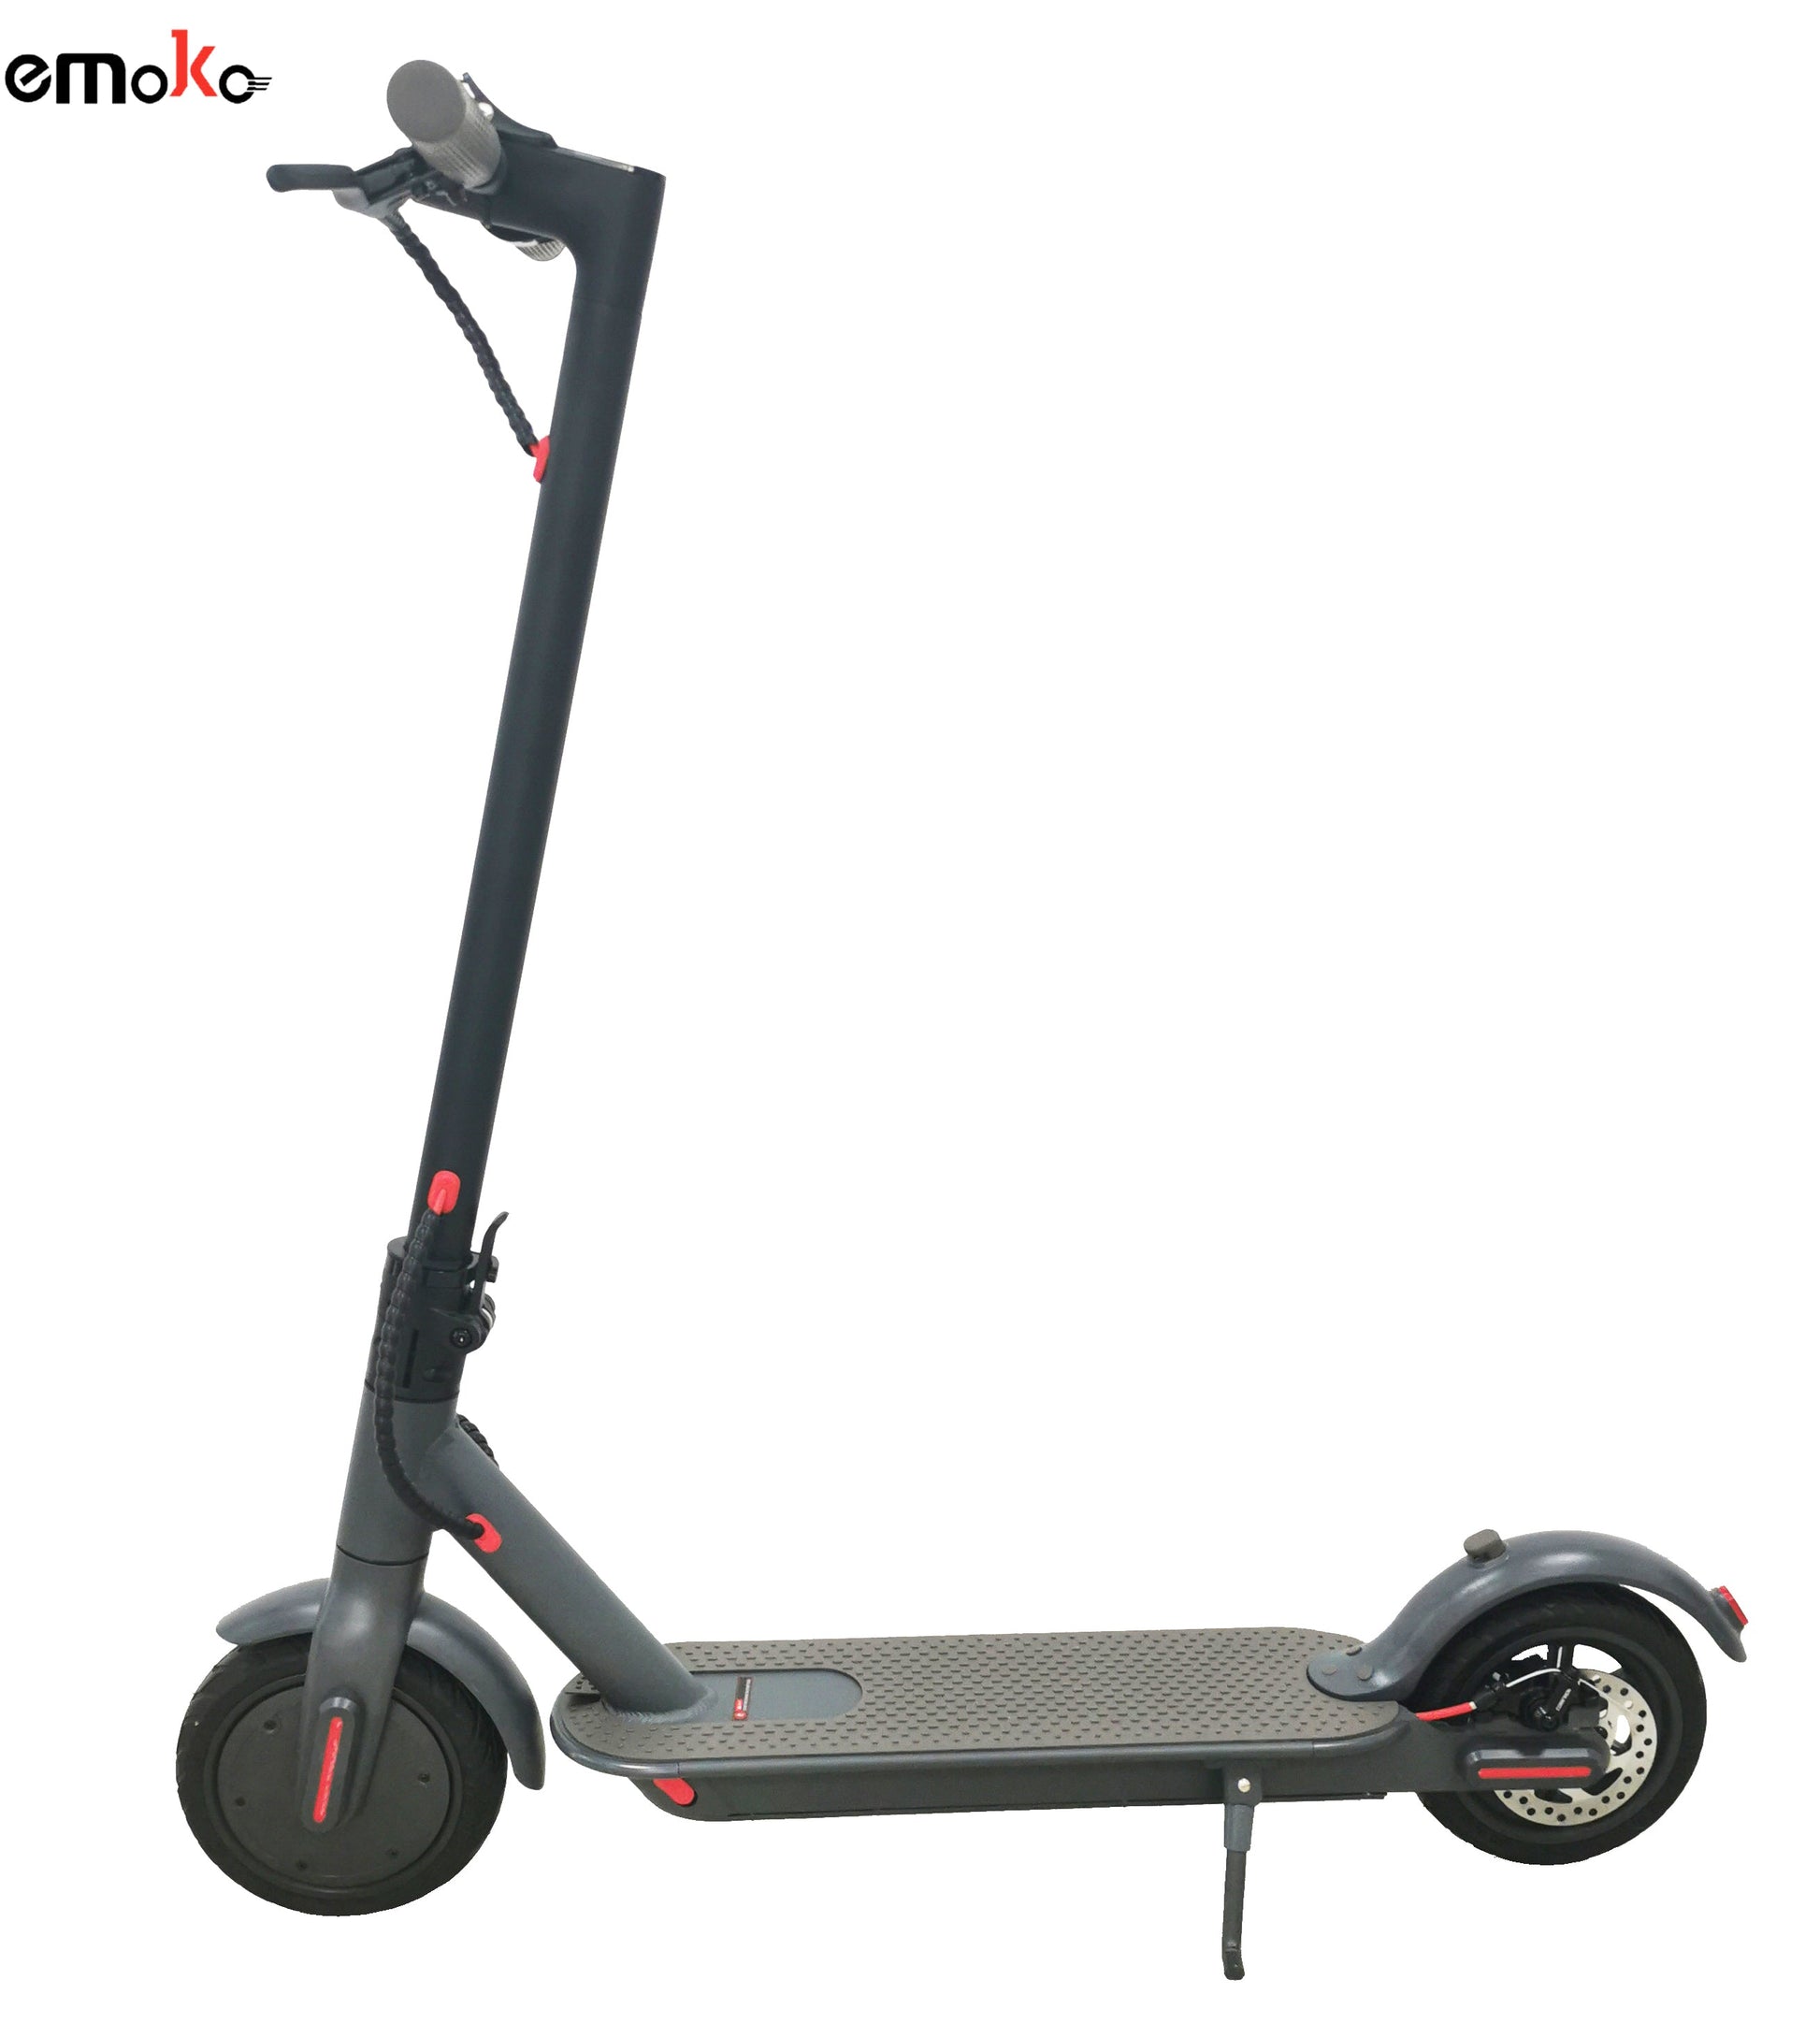 Scooter adult factory 2 Wheel Made In China OEM No 1 popular electric scooter 36v 350w for adult baby magazin 